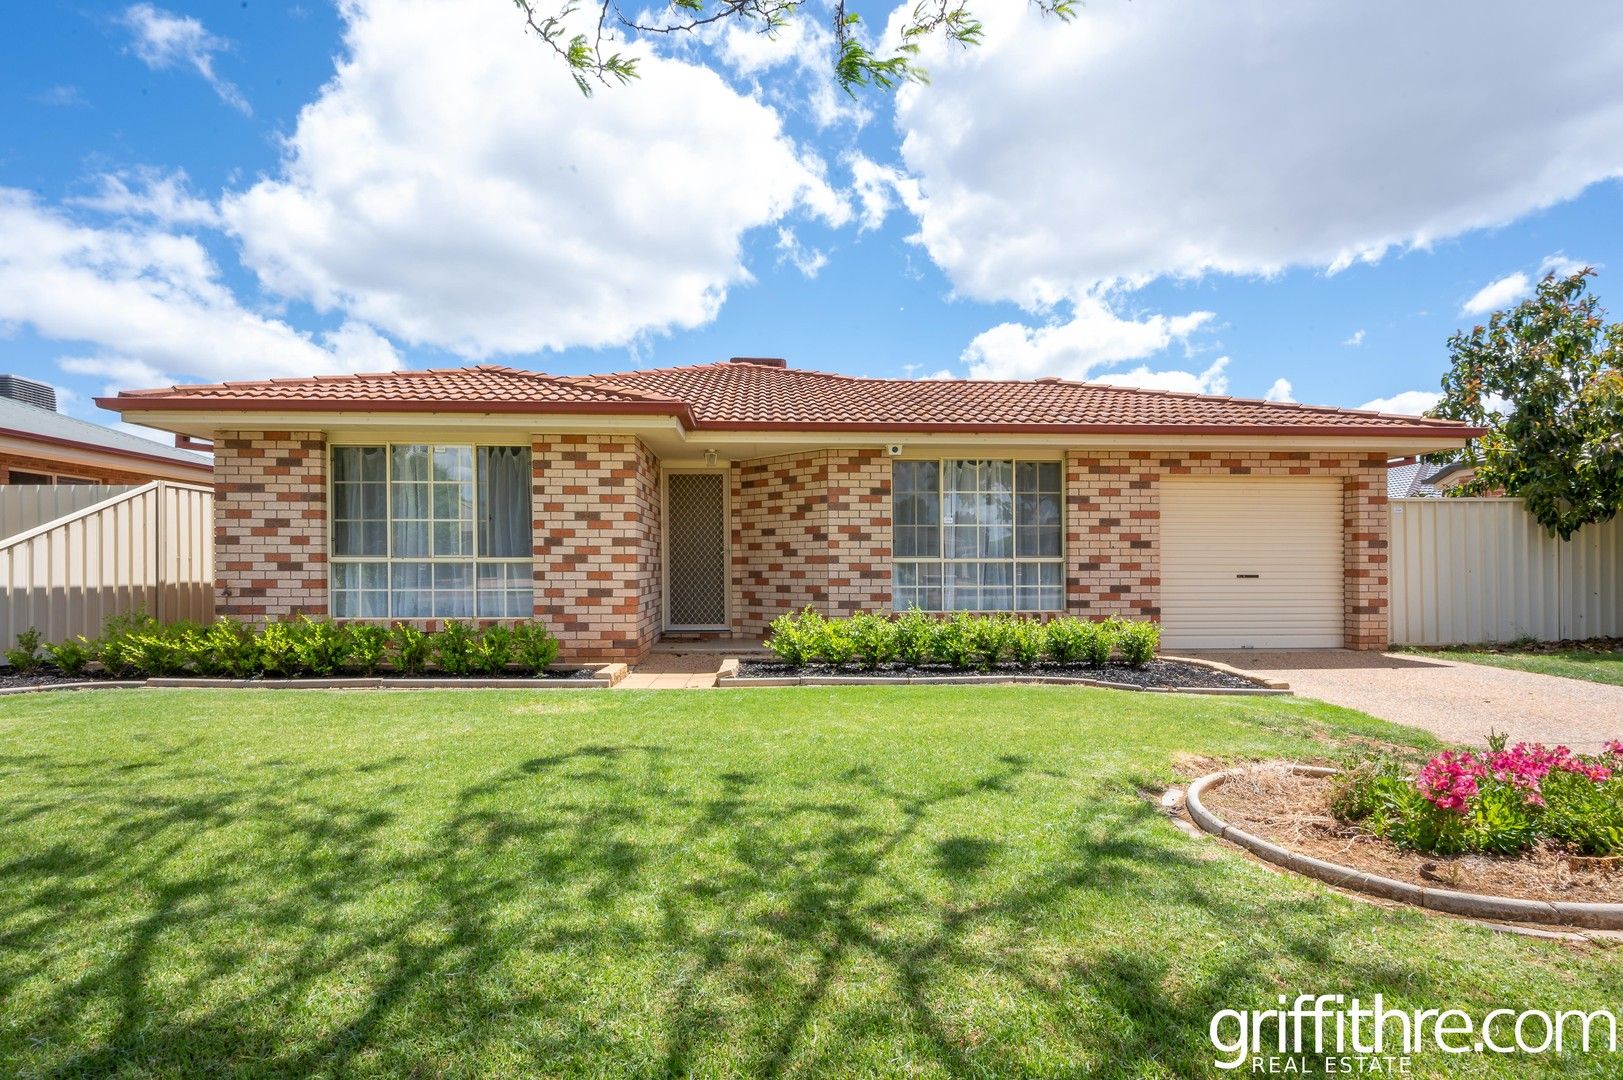 4 bedrooms House in 19 Little Road GRIFFITH NSW, 2680